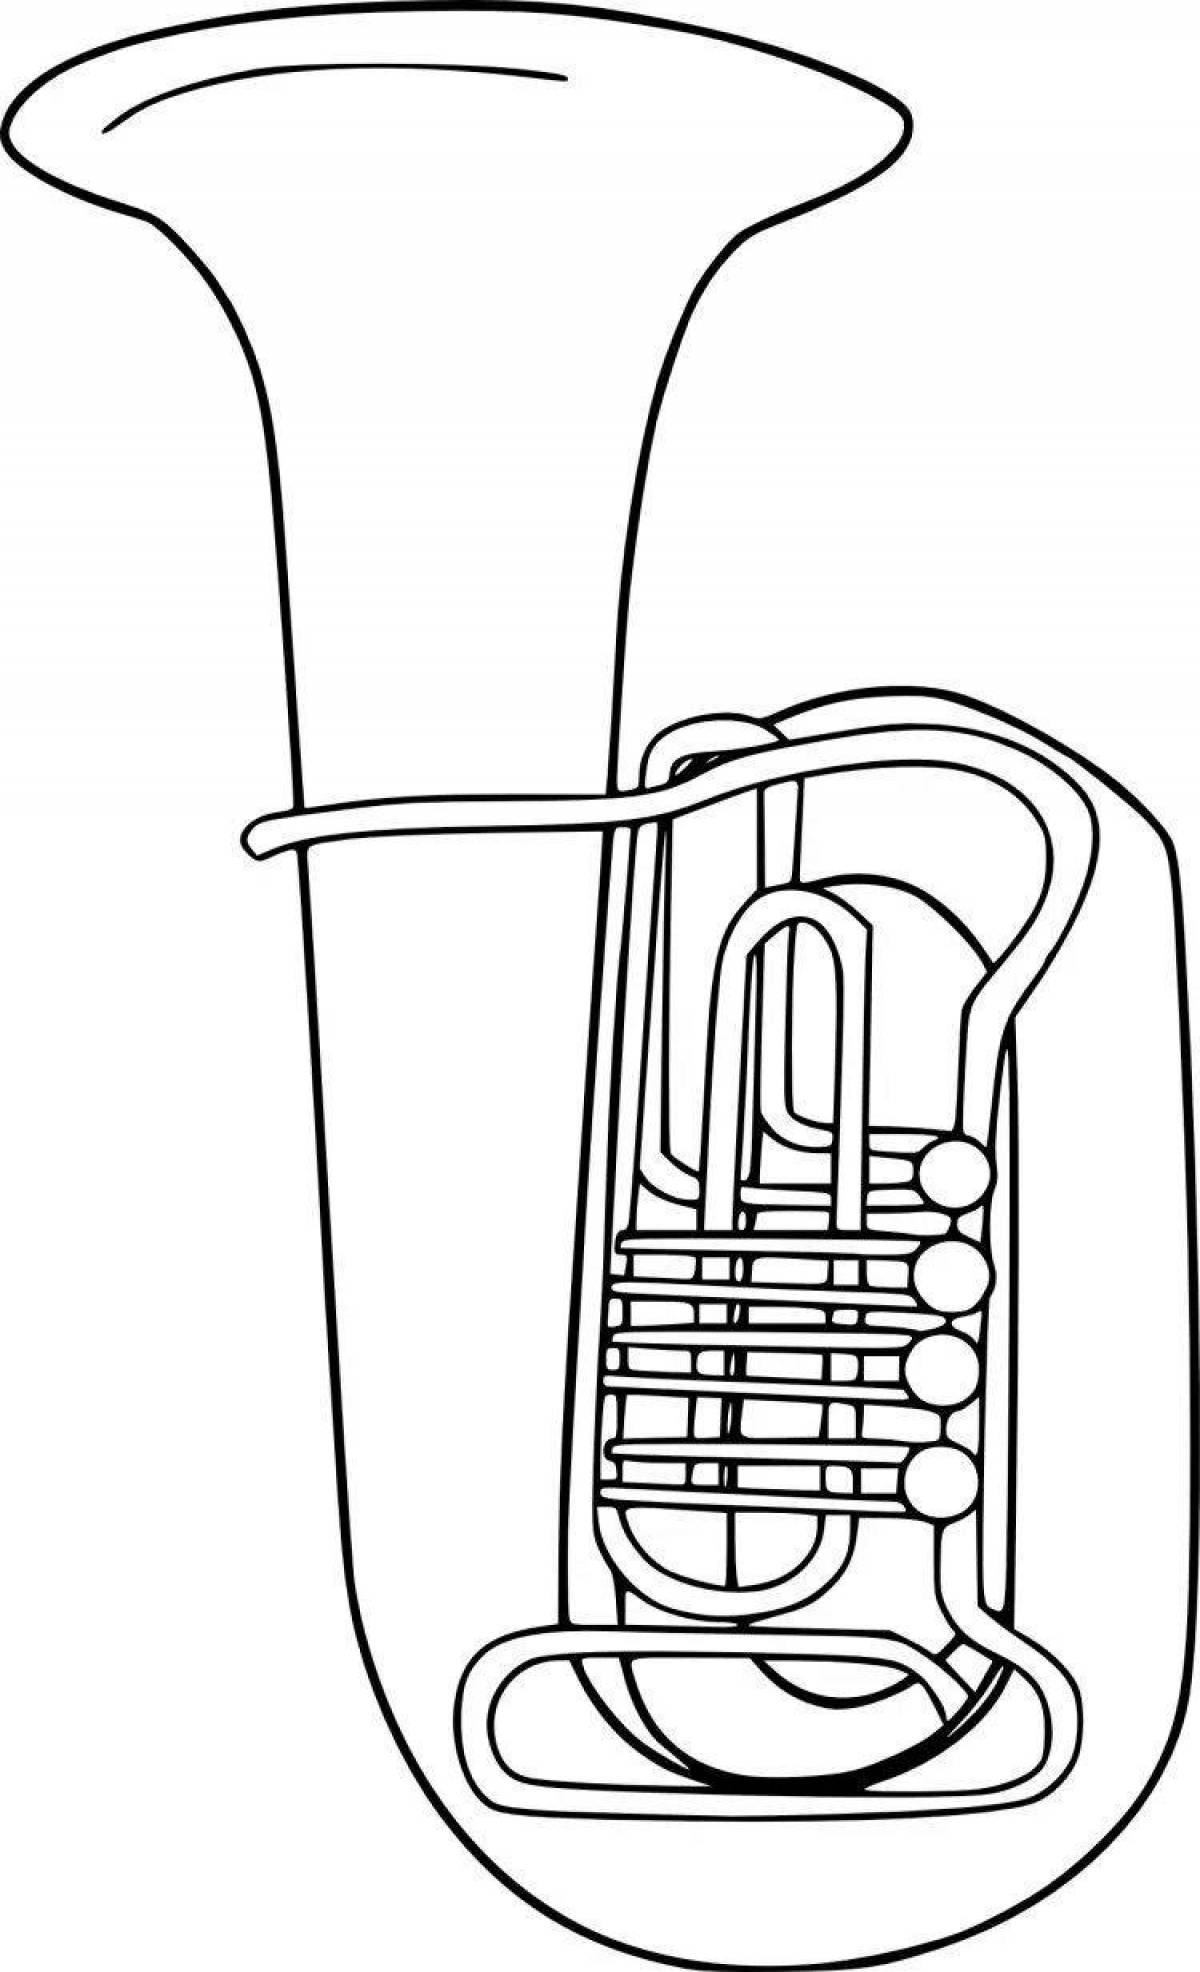 Coloring page festive wind instruments